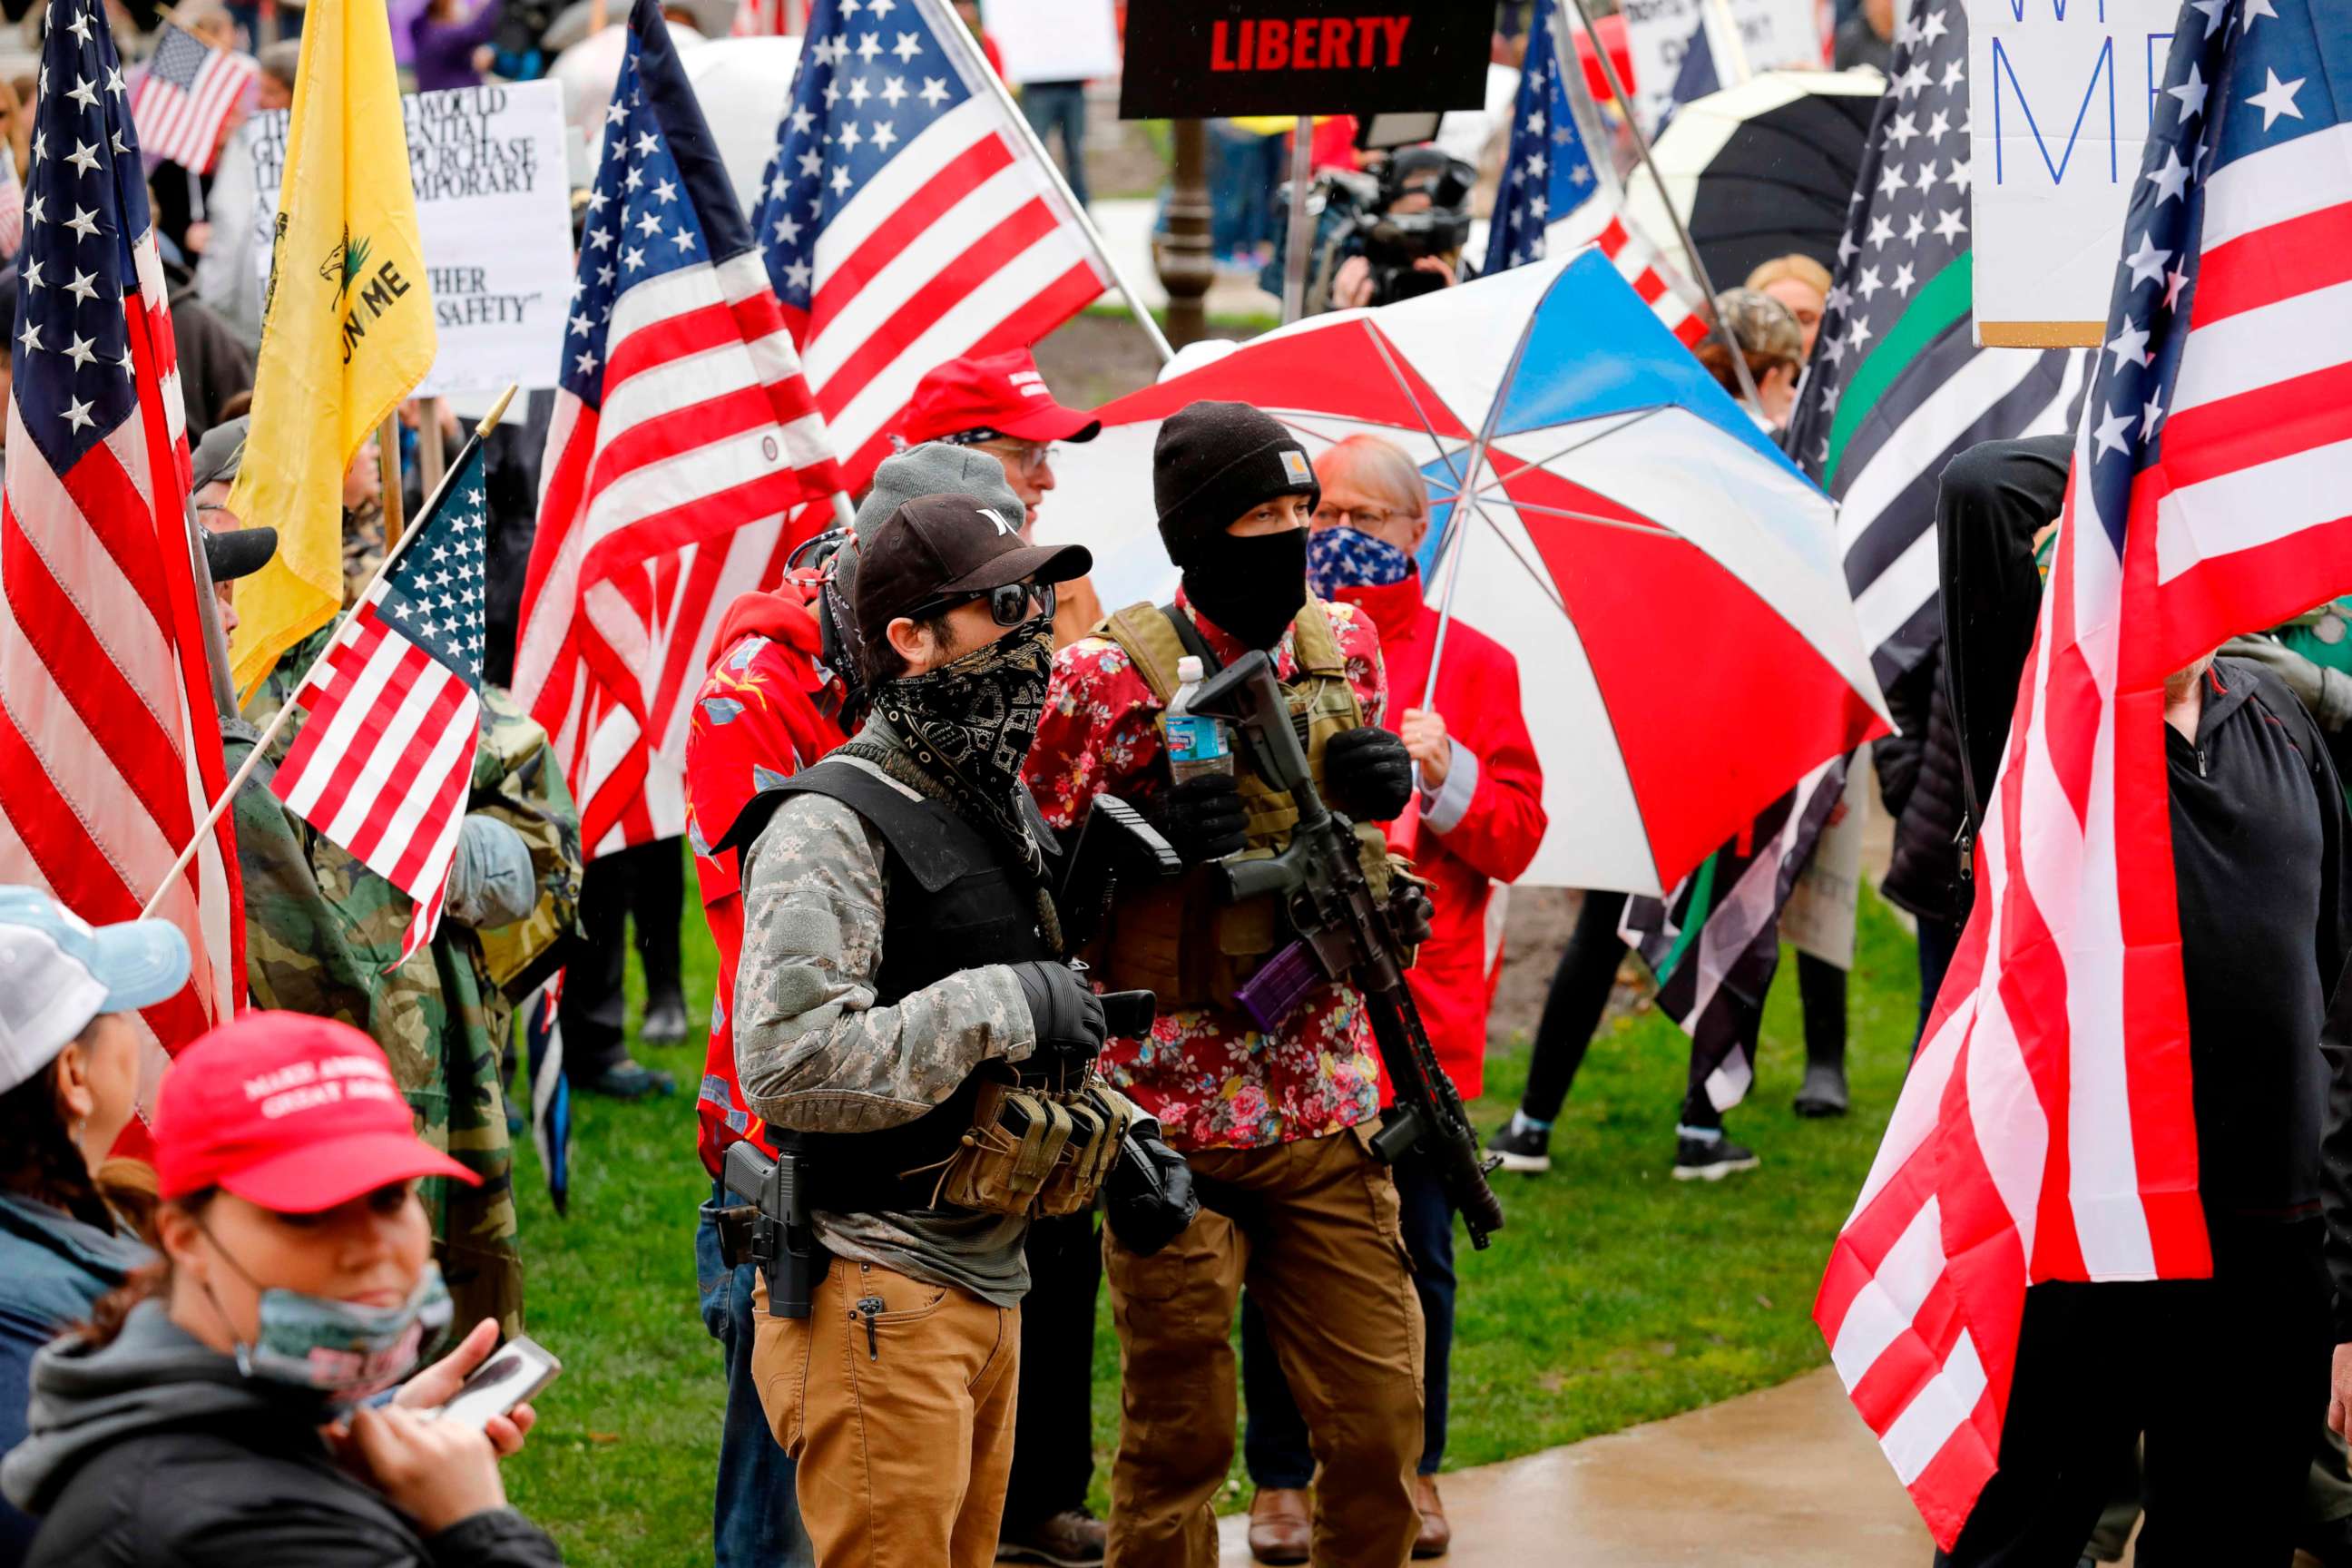 PHOTO: Armed protesters provide security as demonstrators take part in an "American Patriot Rally," organized on April 30, 2020, by Michigan United for Liberty on the steps of the Michigan State Capitol in Lansing, demanding the reopening of businesses.